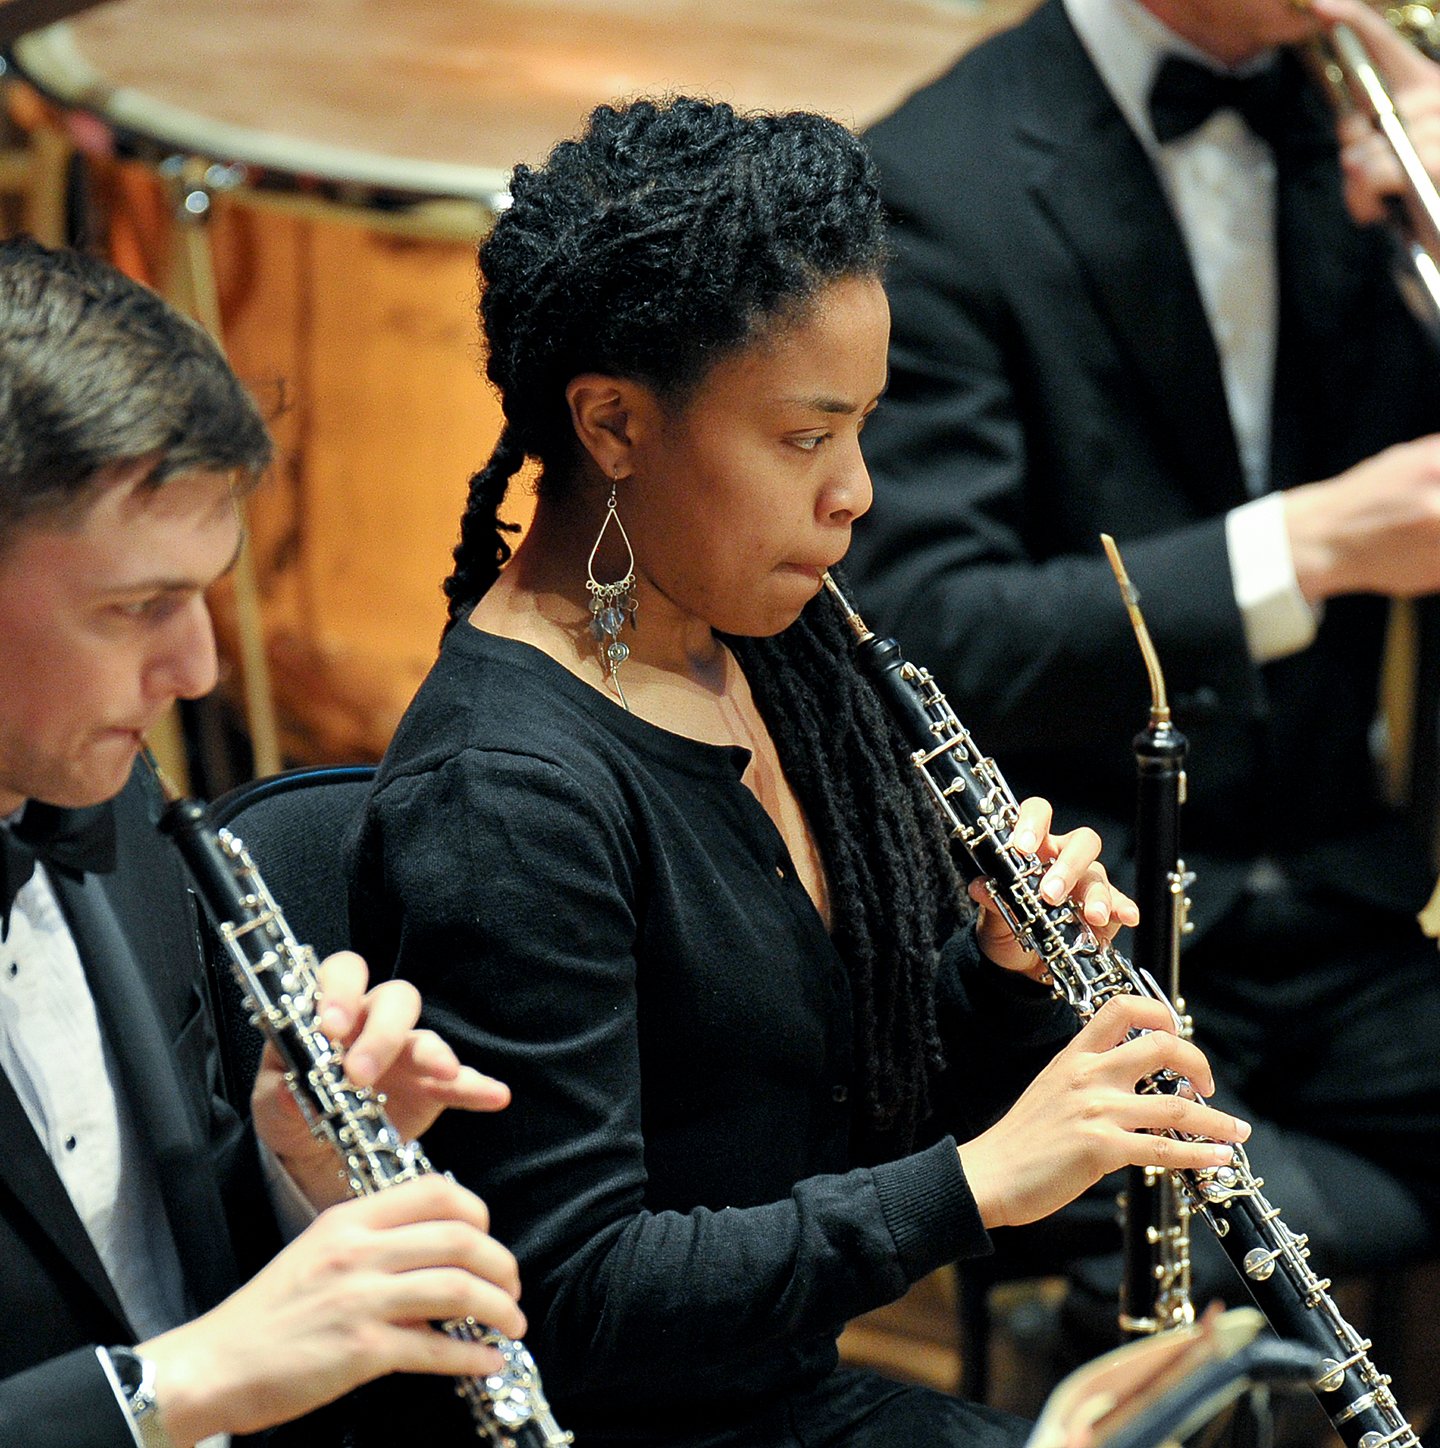 Two oboists performing